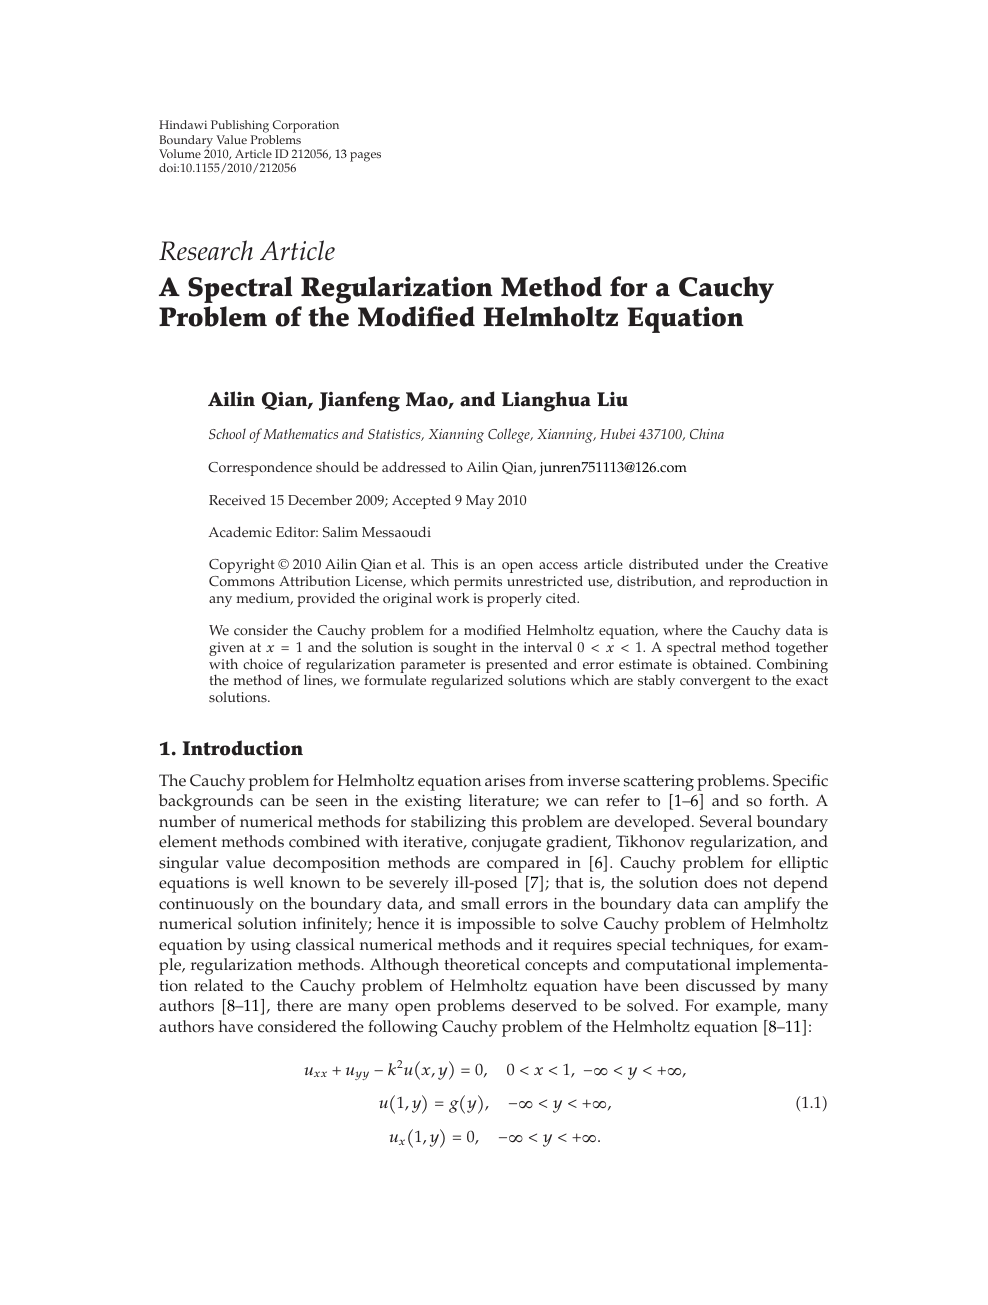 A Spectral Regularization Method For A Cauchy Problem Of The Modified Helmholtz Equation Topic Of Research Paper In Mathematics Download Scholarly Article Pdf And Read For Free On Cyberleninka Open Science